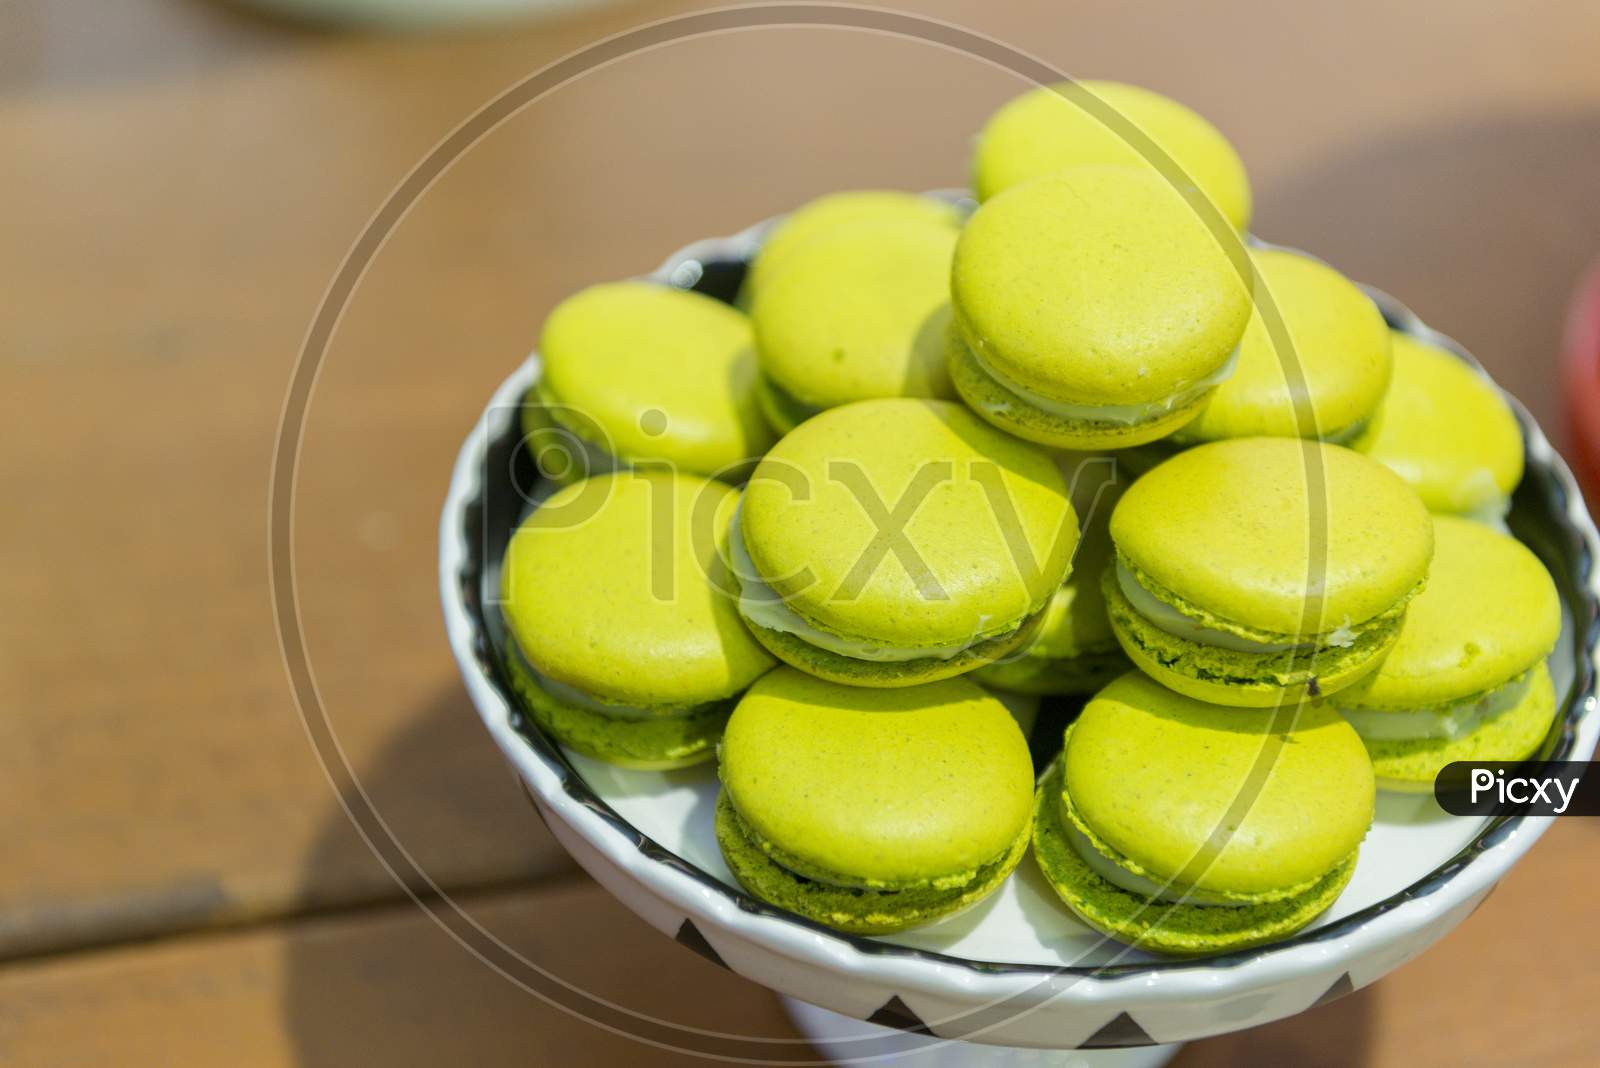 Several Lemon-Flavored Green Macaroons On A Ceramic Tray.